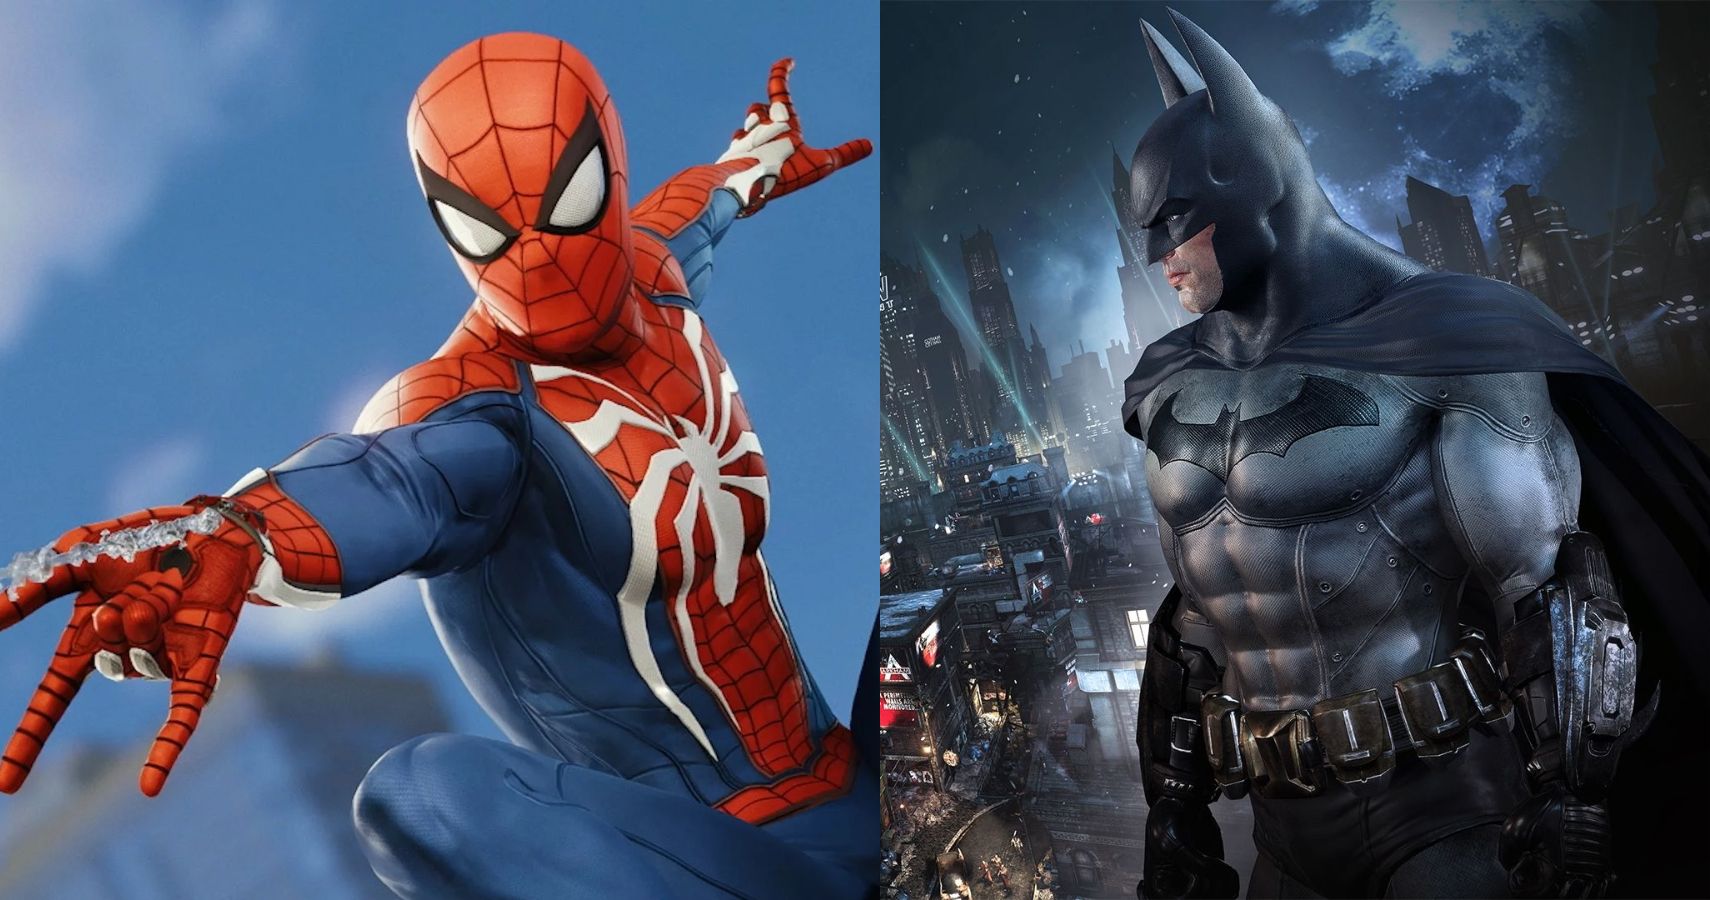 Marvel Has Been Trouncing DC in the Video Game Space